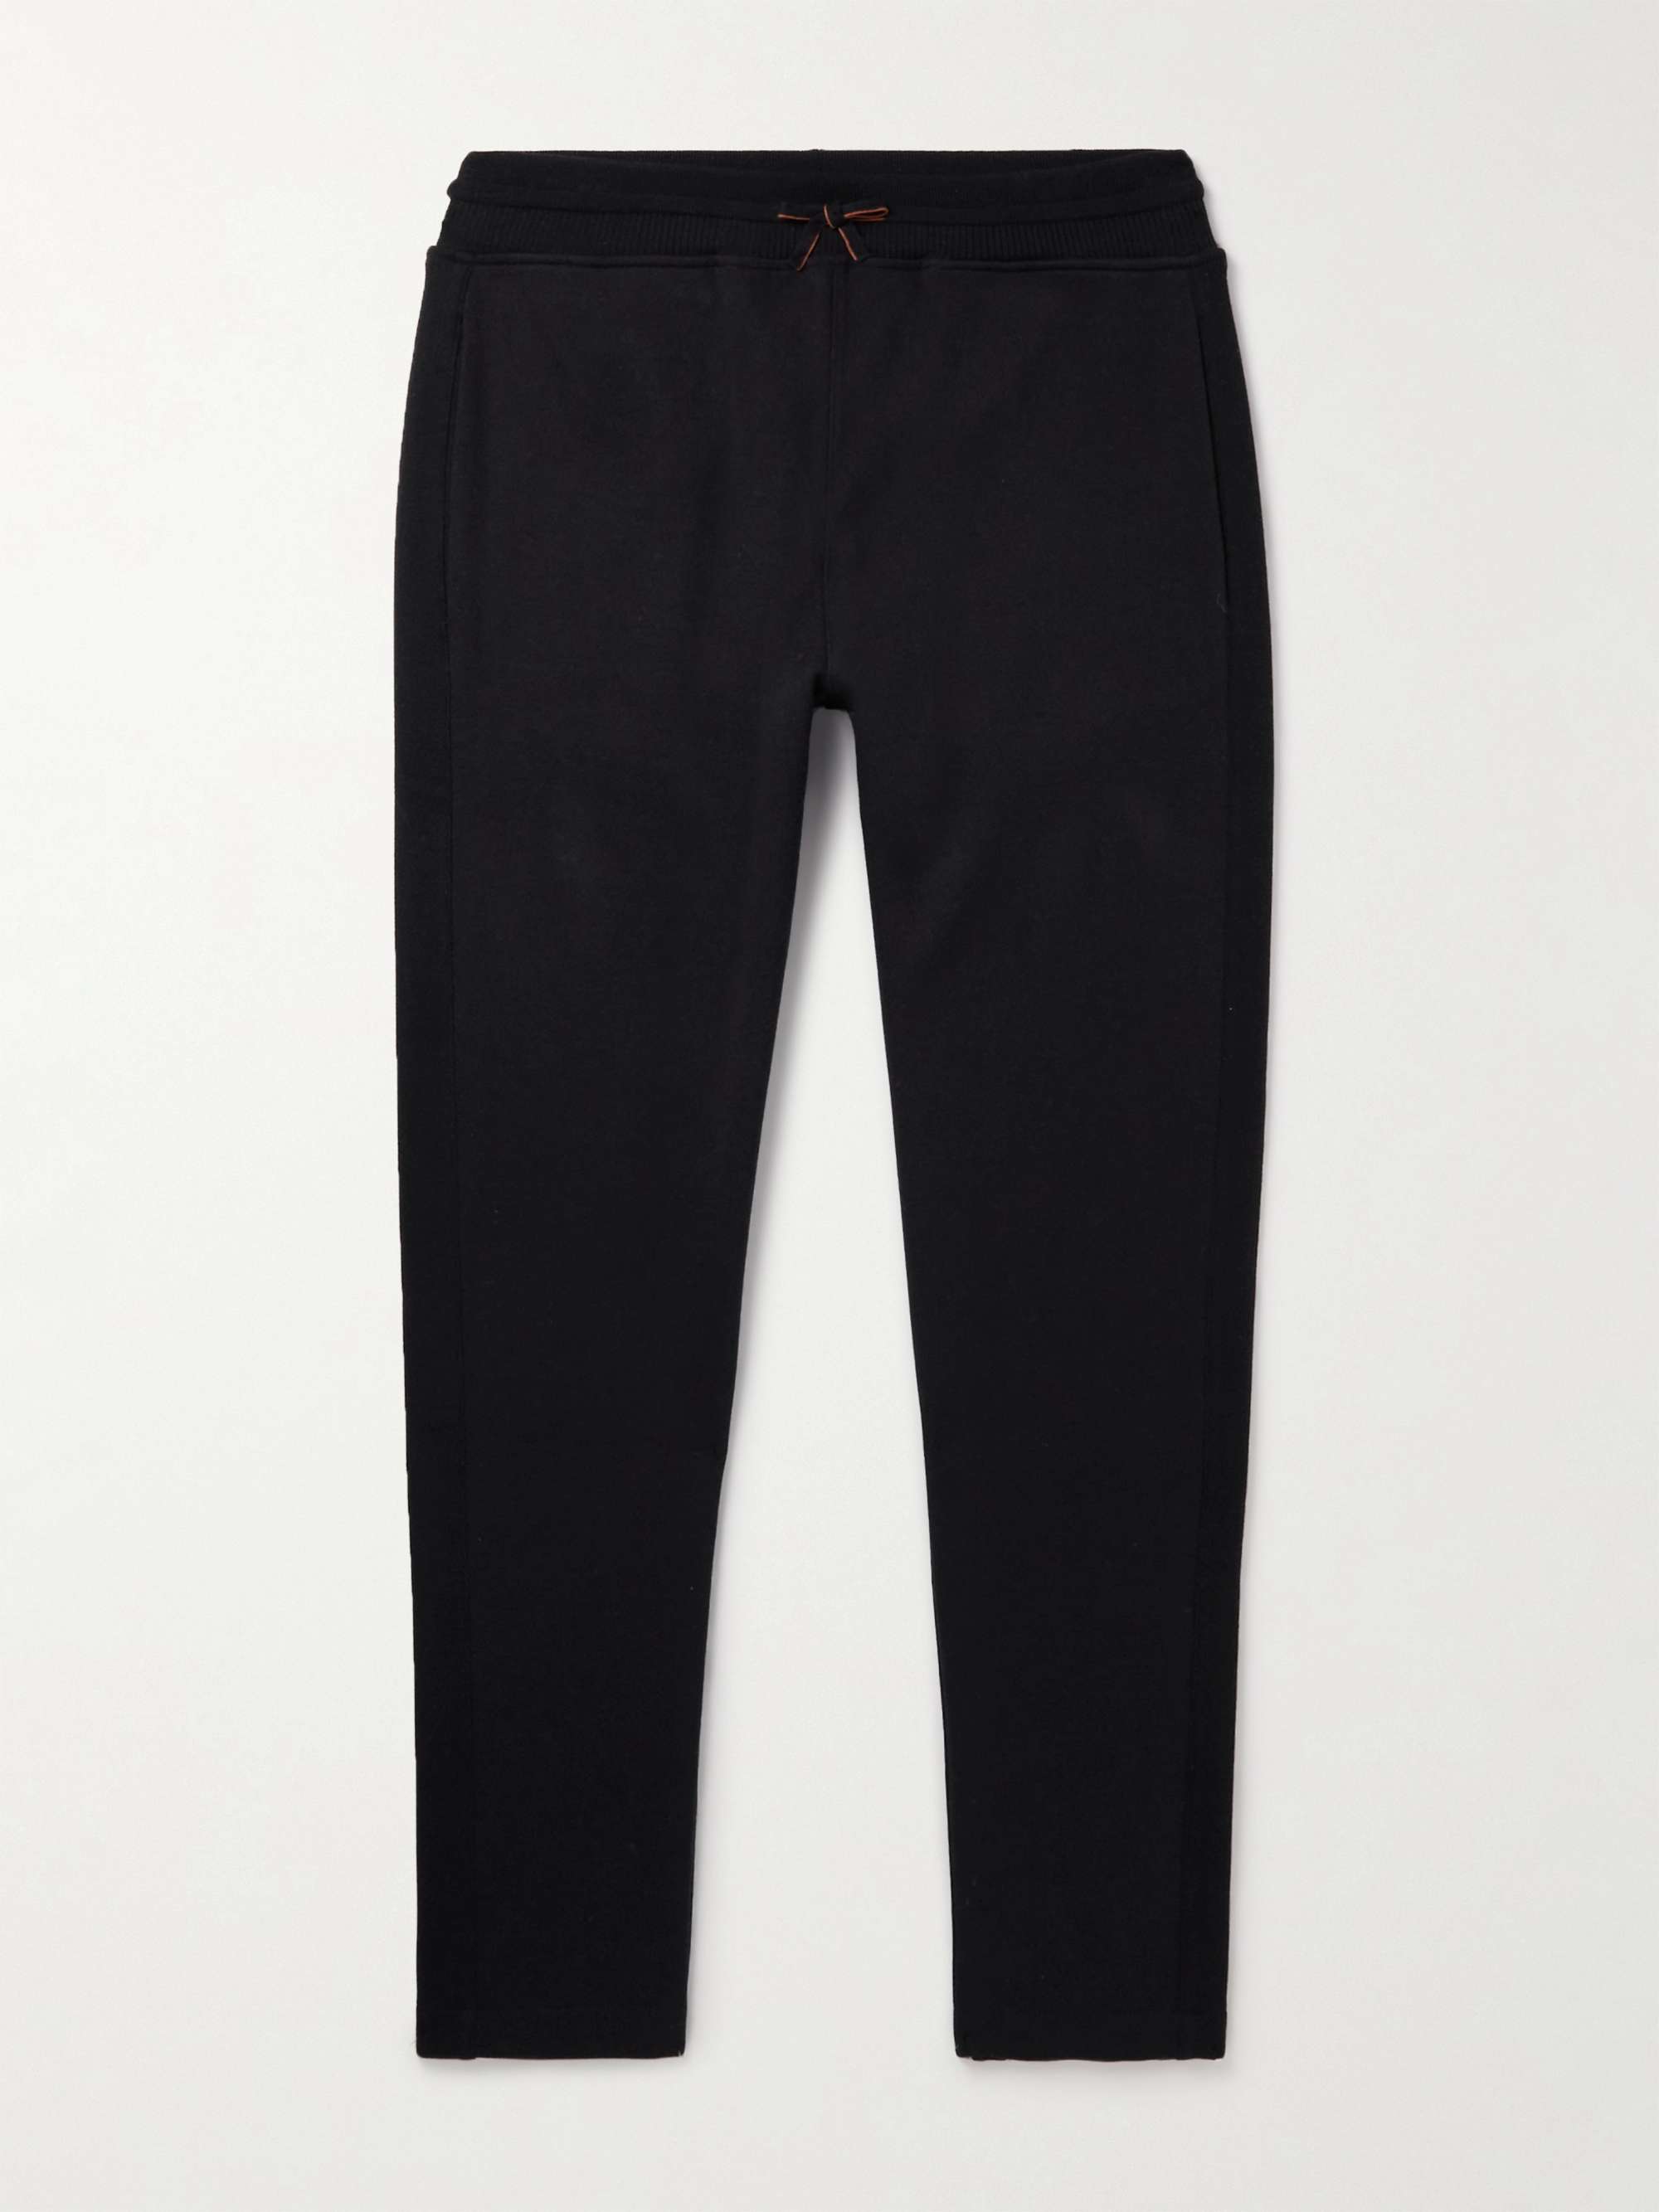 TOM FORD Tapered Cotton-Blend Jersey Sweatpants for Men